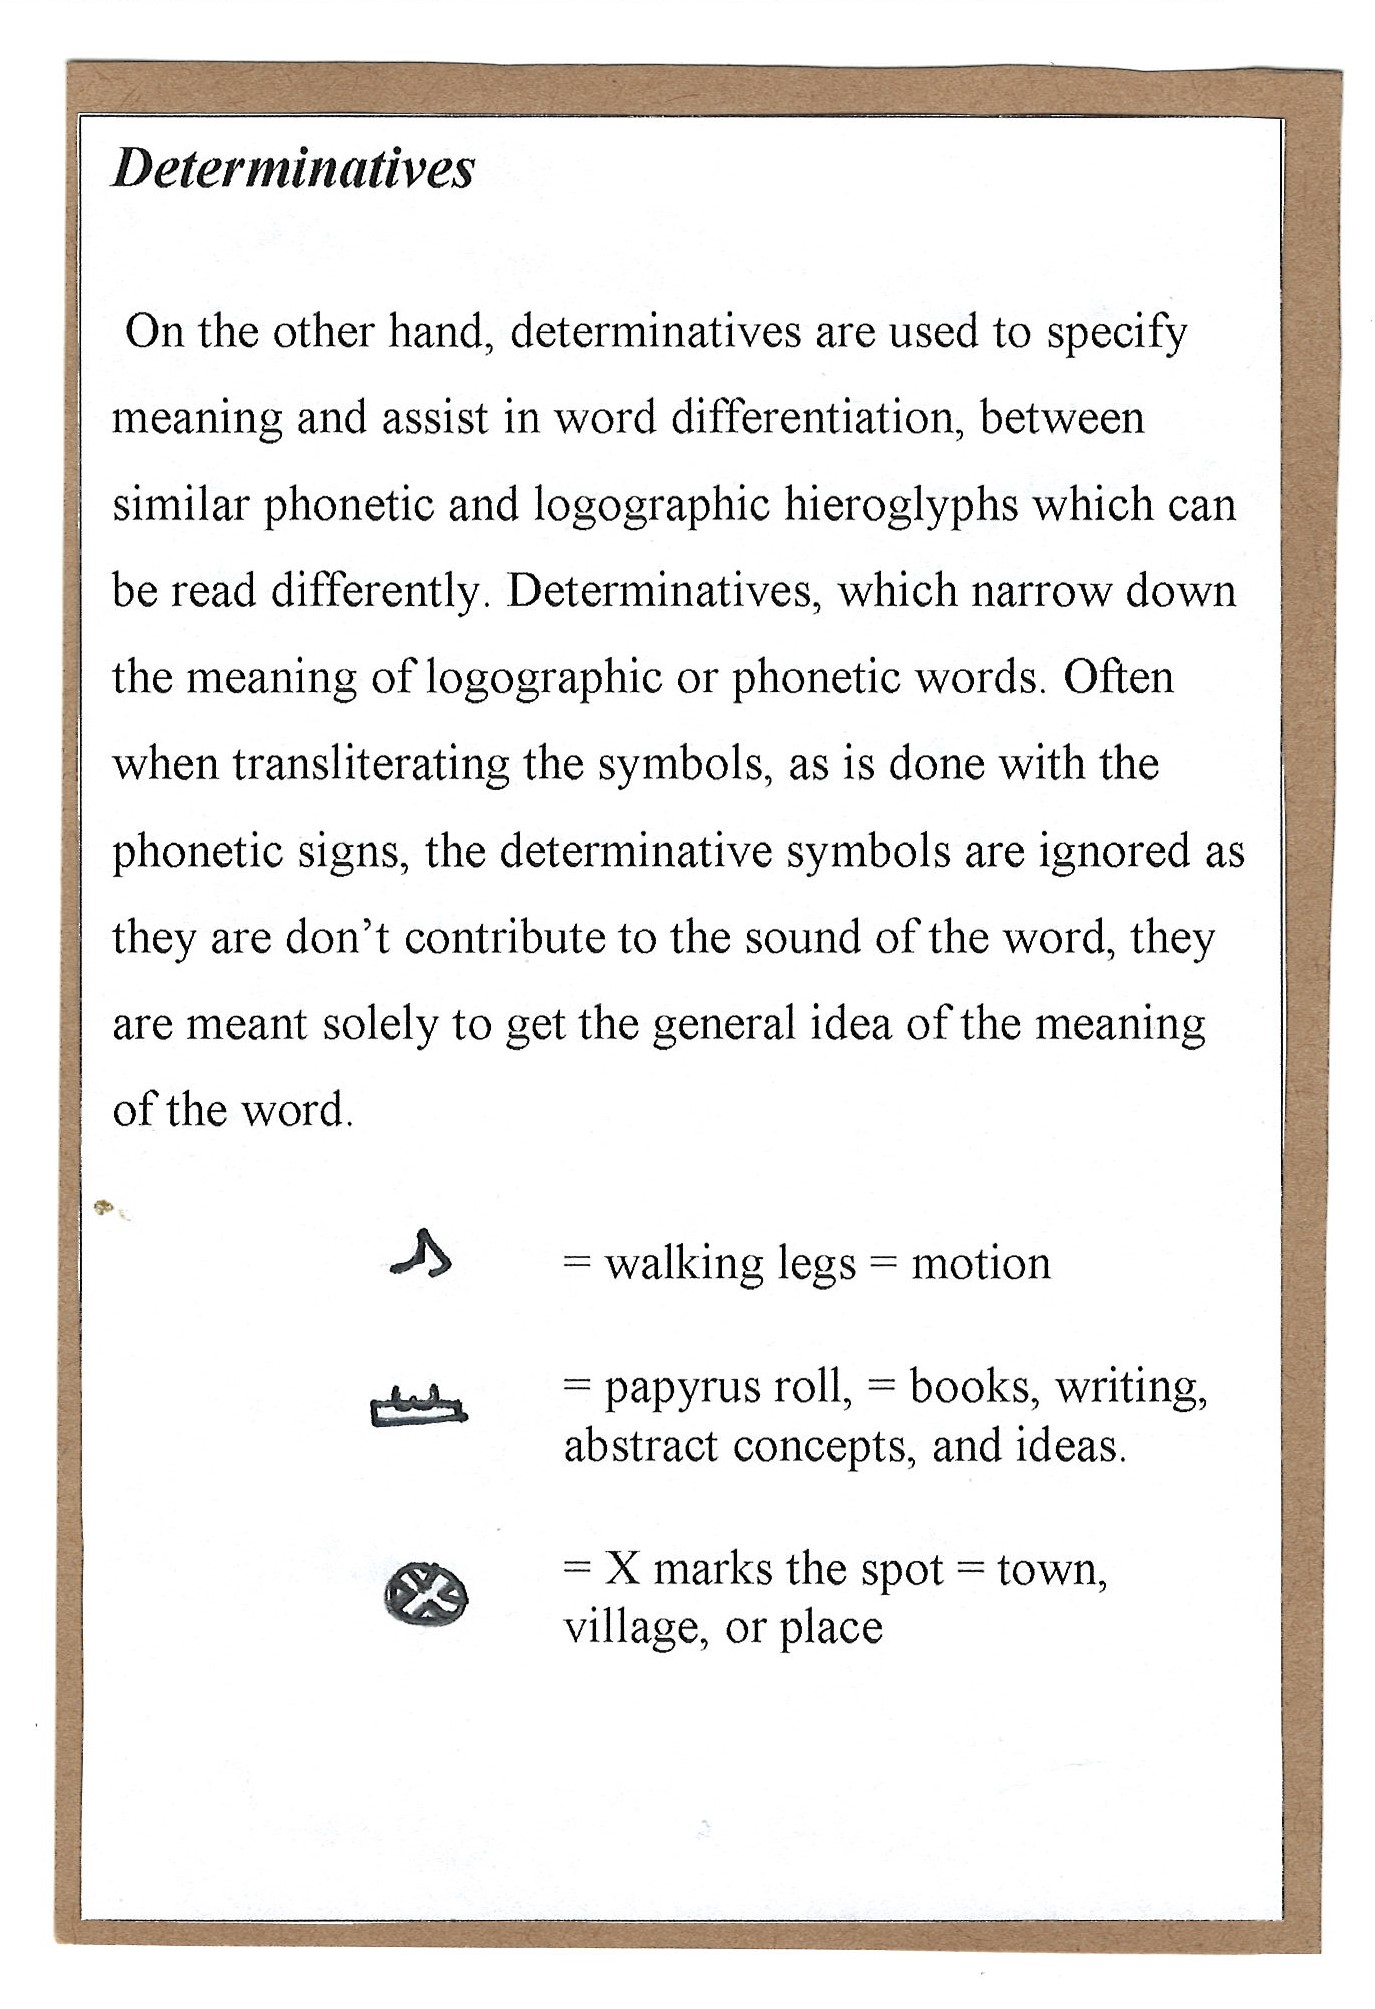 Page 4. Determinatives, and the way these signs allow for the readability of this vastly symbolic language.